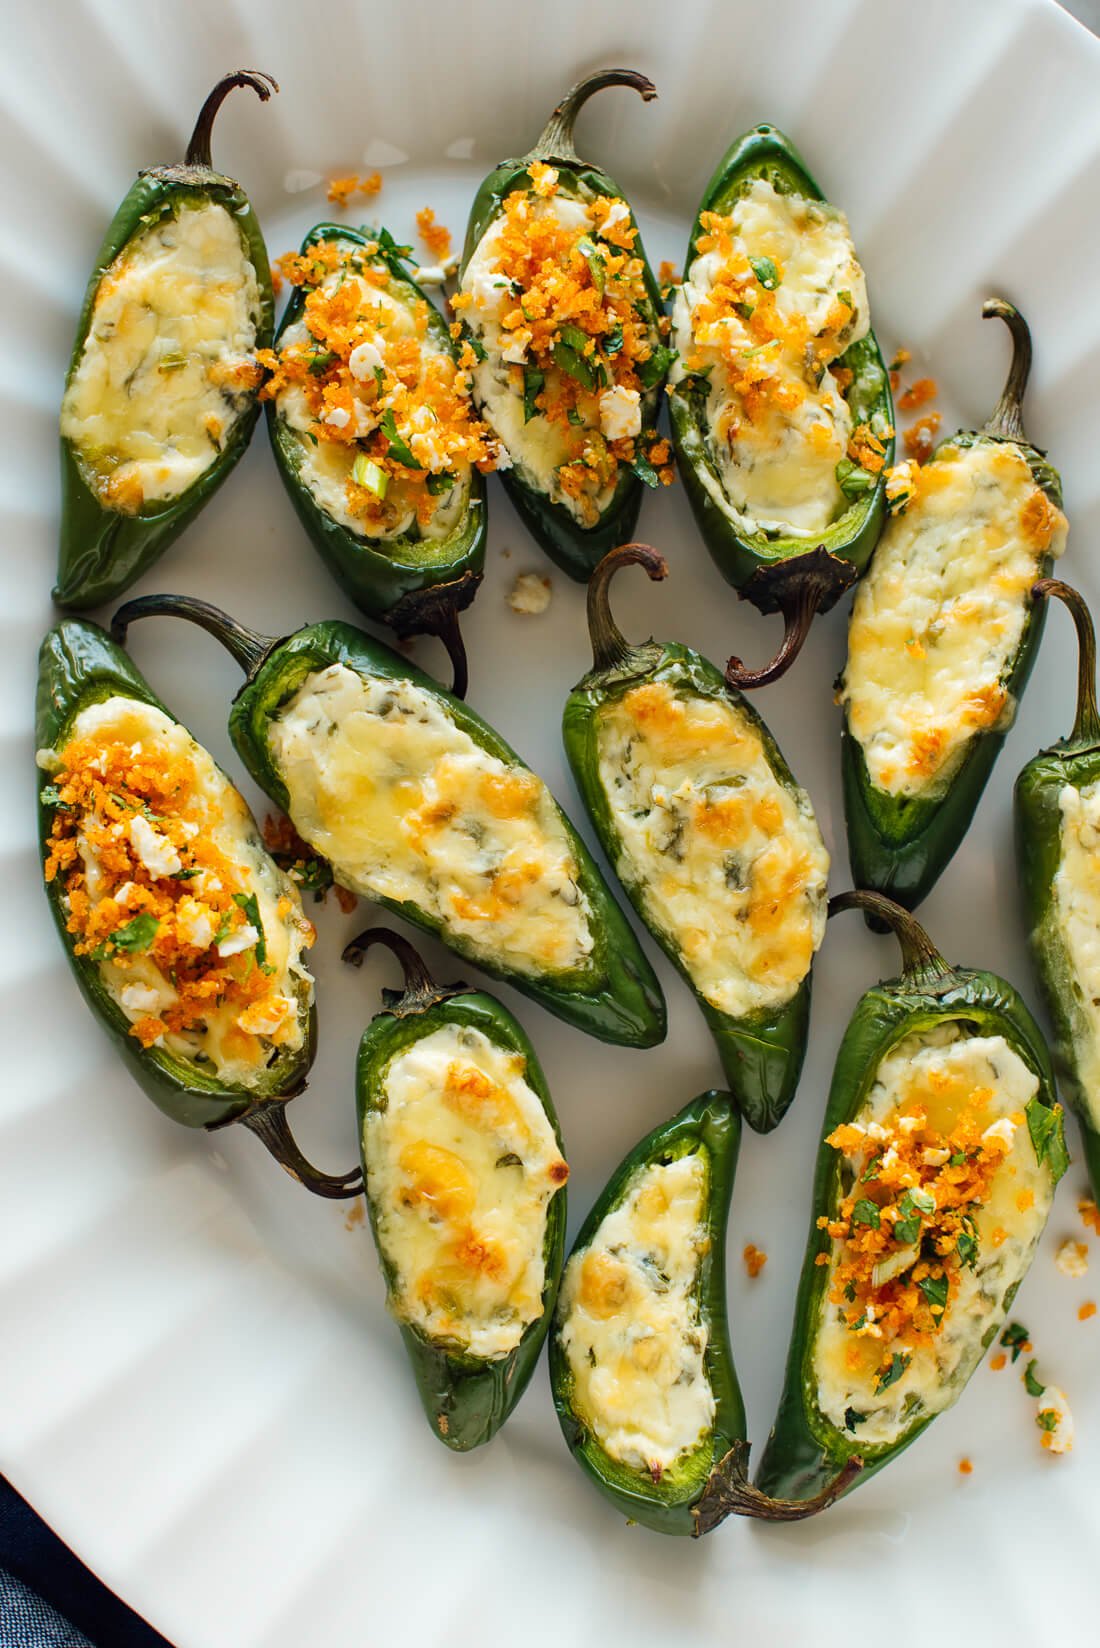 Baked Jalapeno Poppers Recipe Cookie And Kate,How To Blanch Almonds Easily